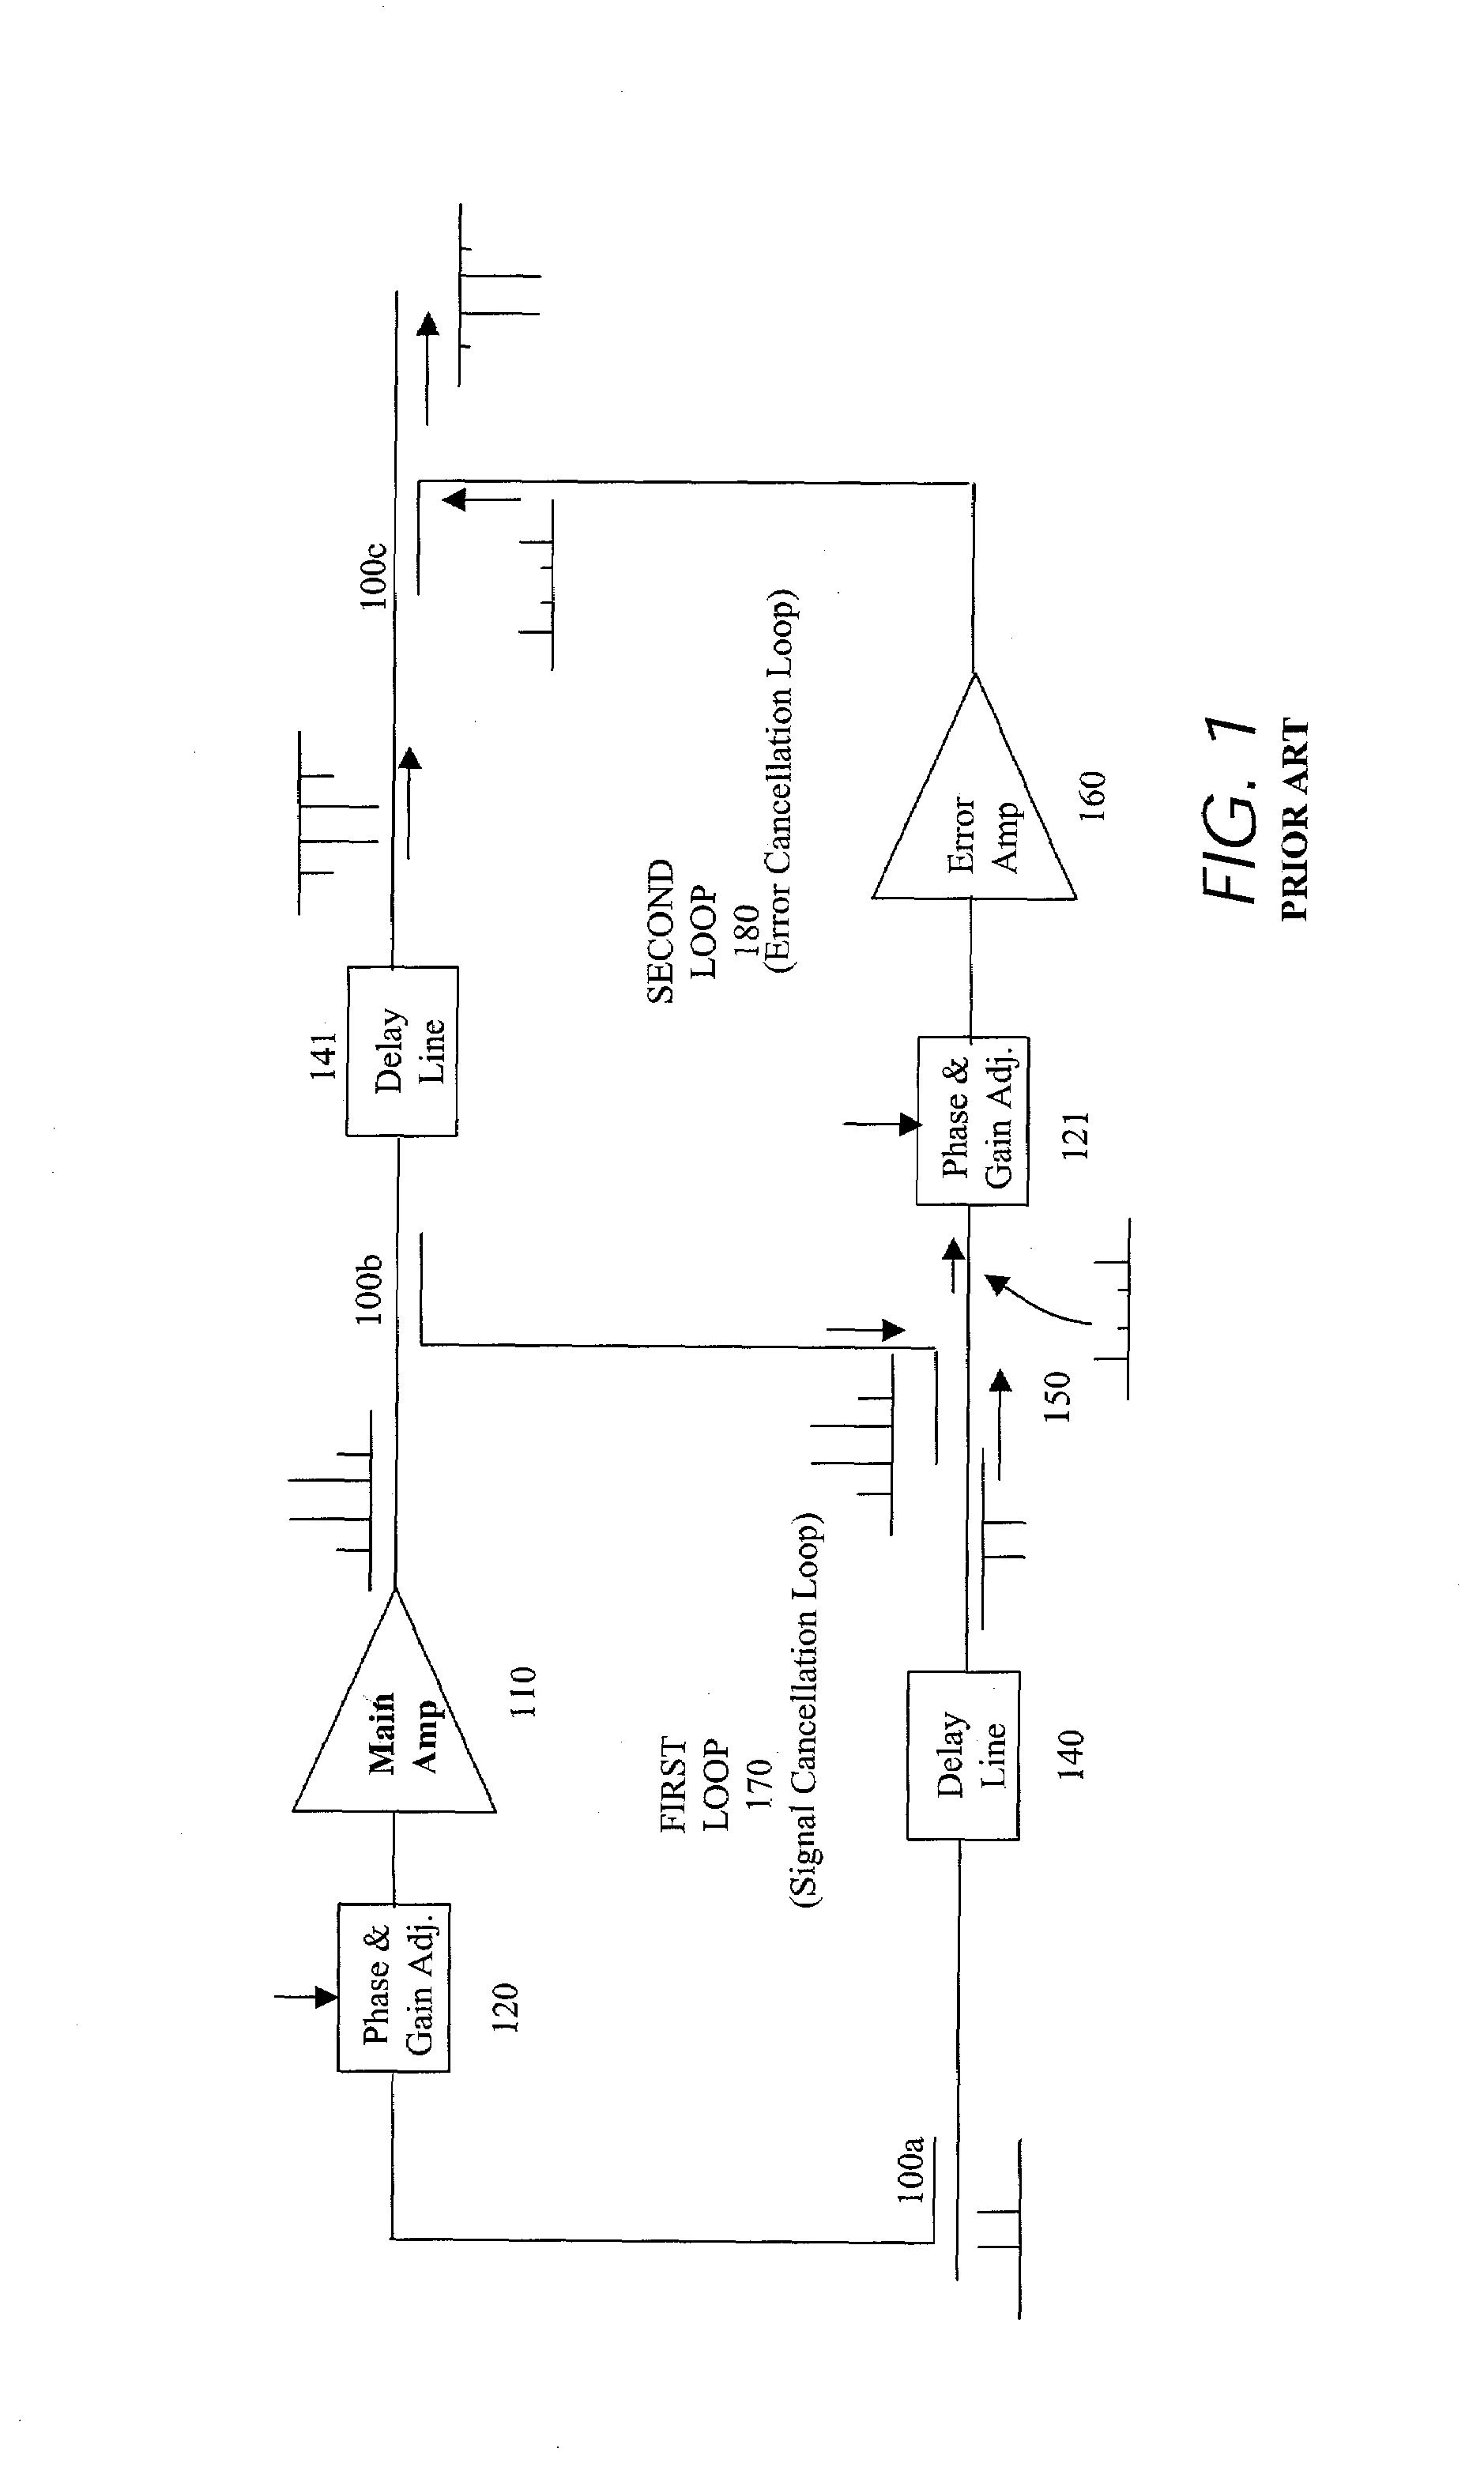 Spurious ratio control circuit for use with feed-forward linear amplifiers